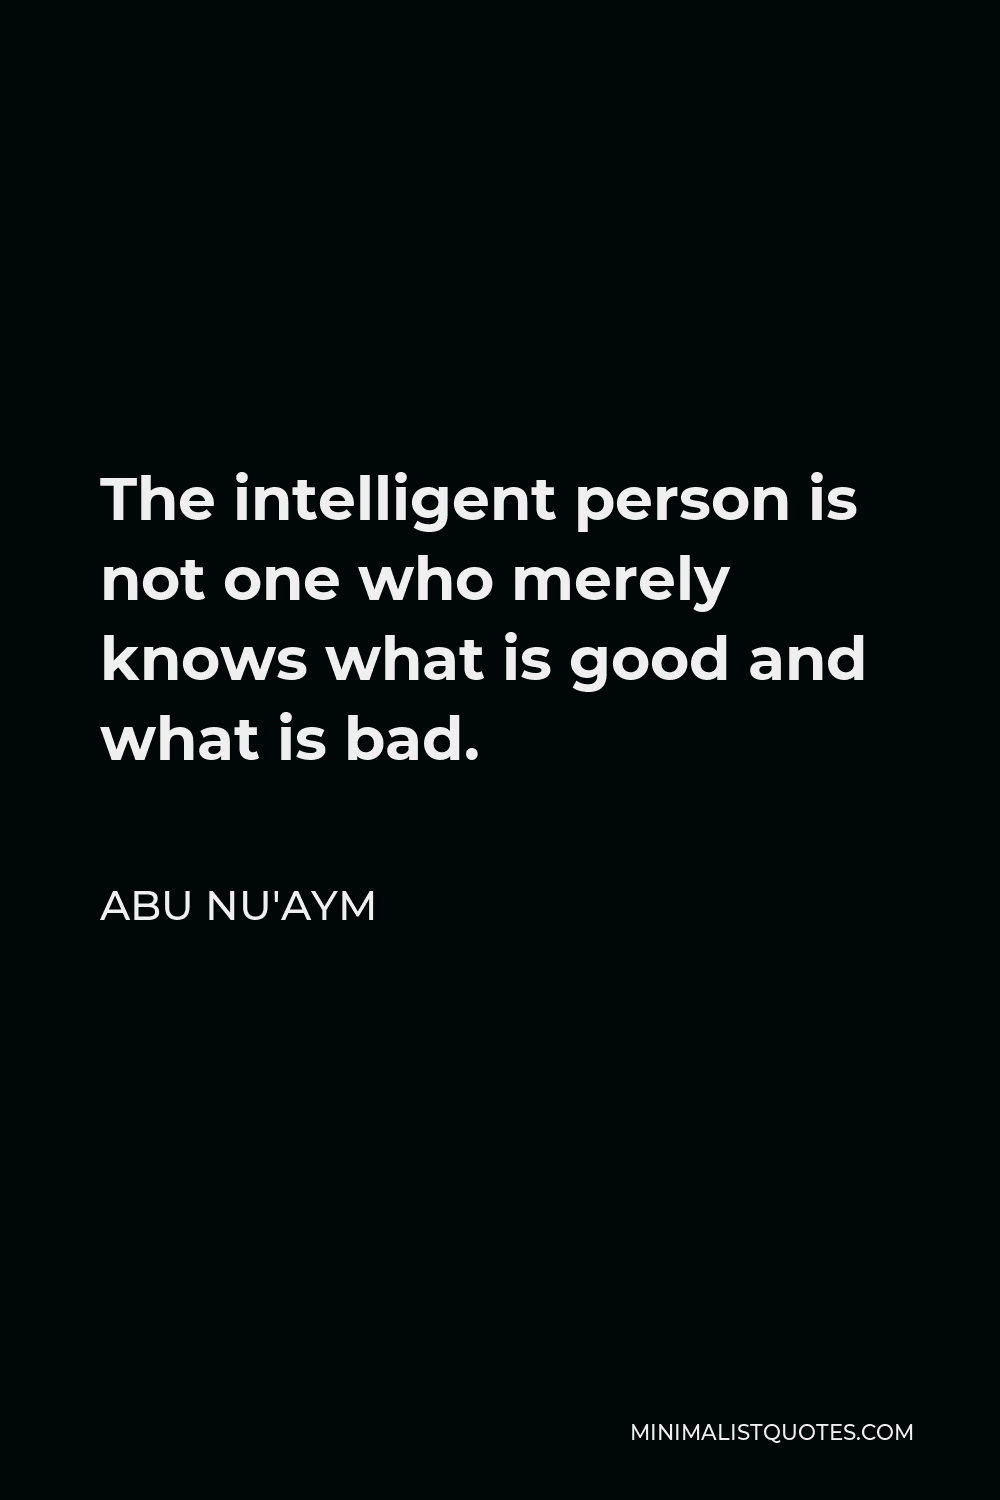 Abu Nu'aym Quote - The intelligent person is not one who merely knows what is good and what is bad.